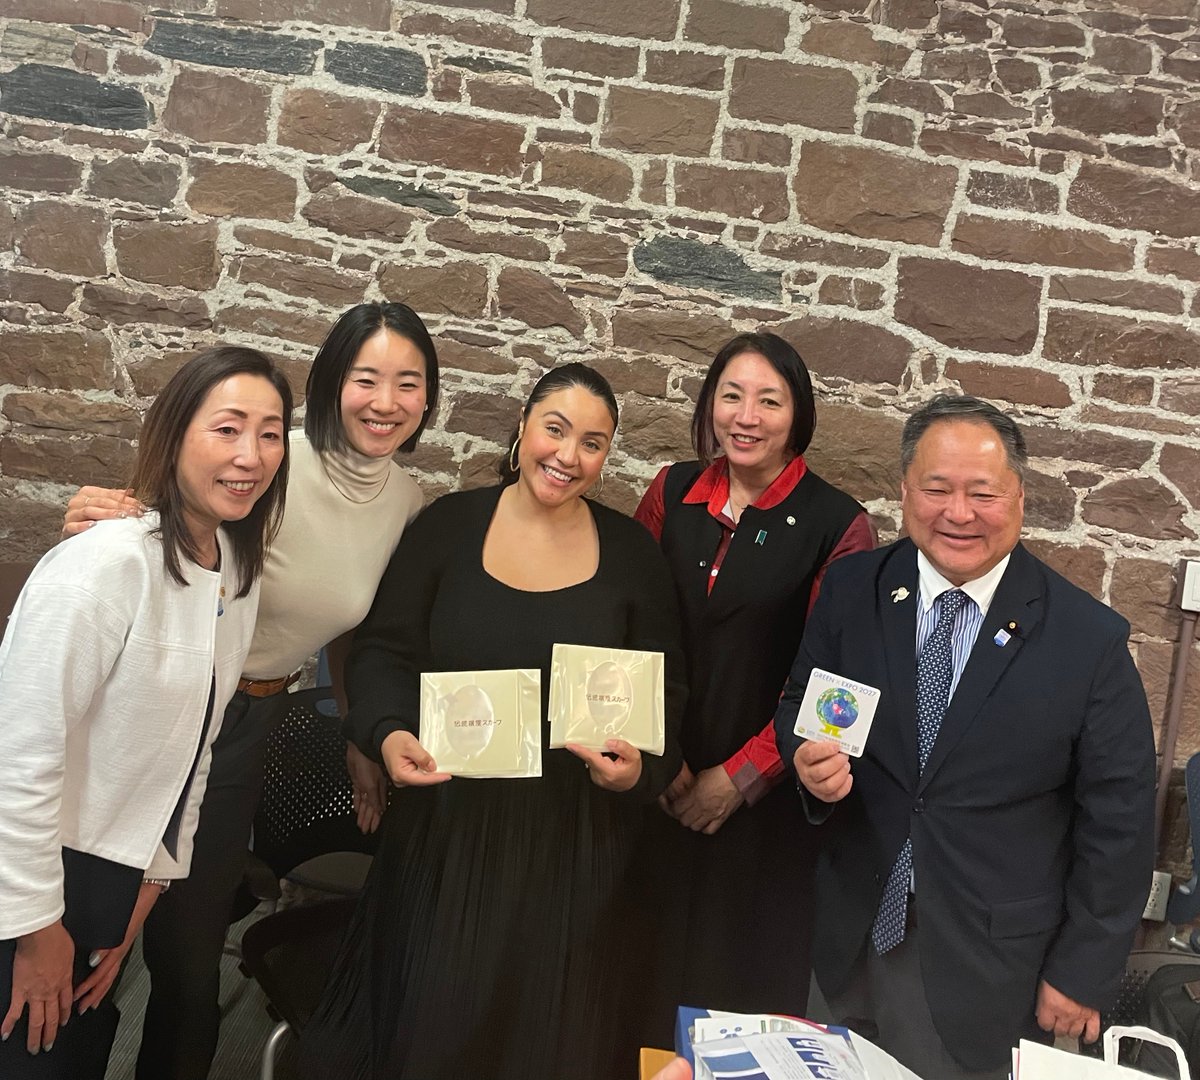 I was honored to meet with some Council Members from Yokohama, Japan as a representative of @nyccouncil to discuss local initiatives ranging from participatory budgeting to open data and data privacy.